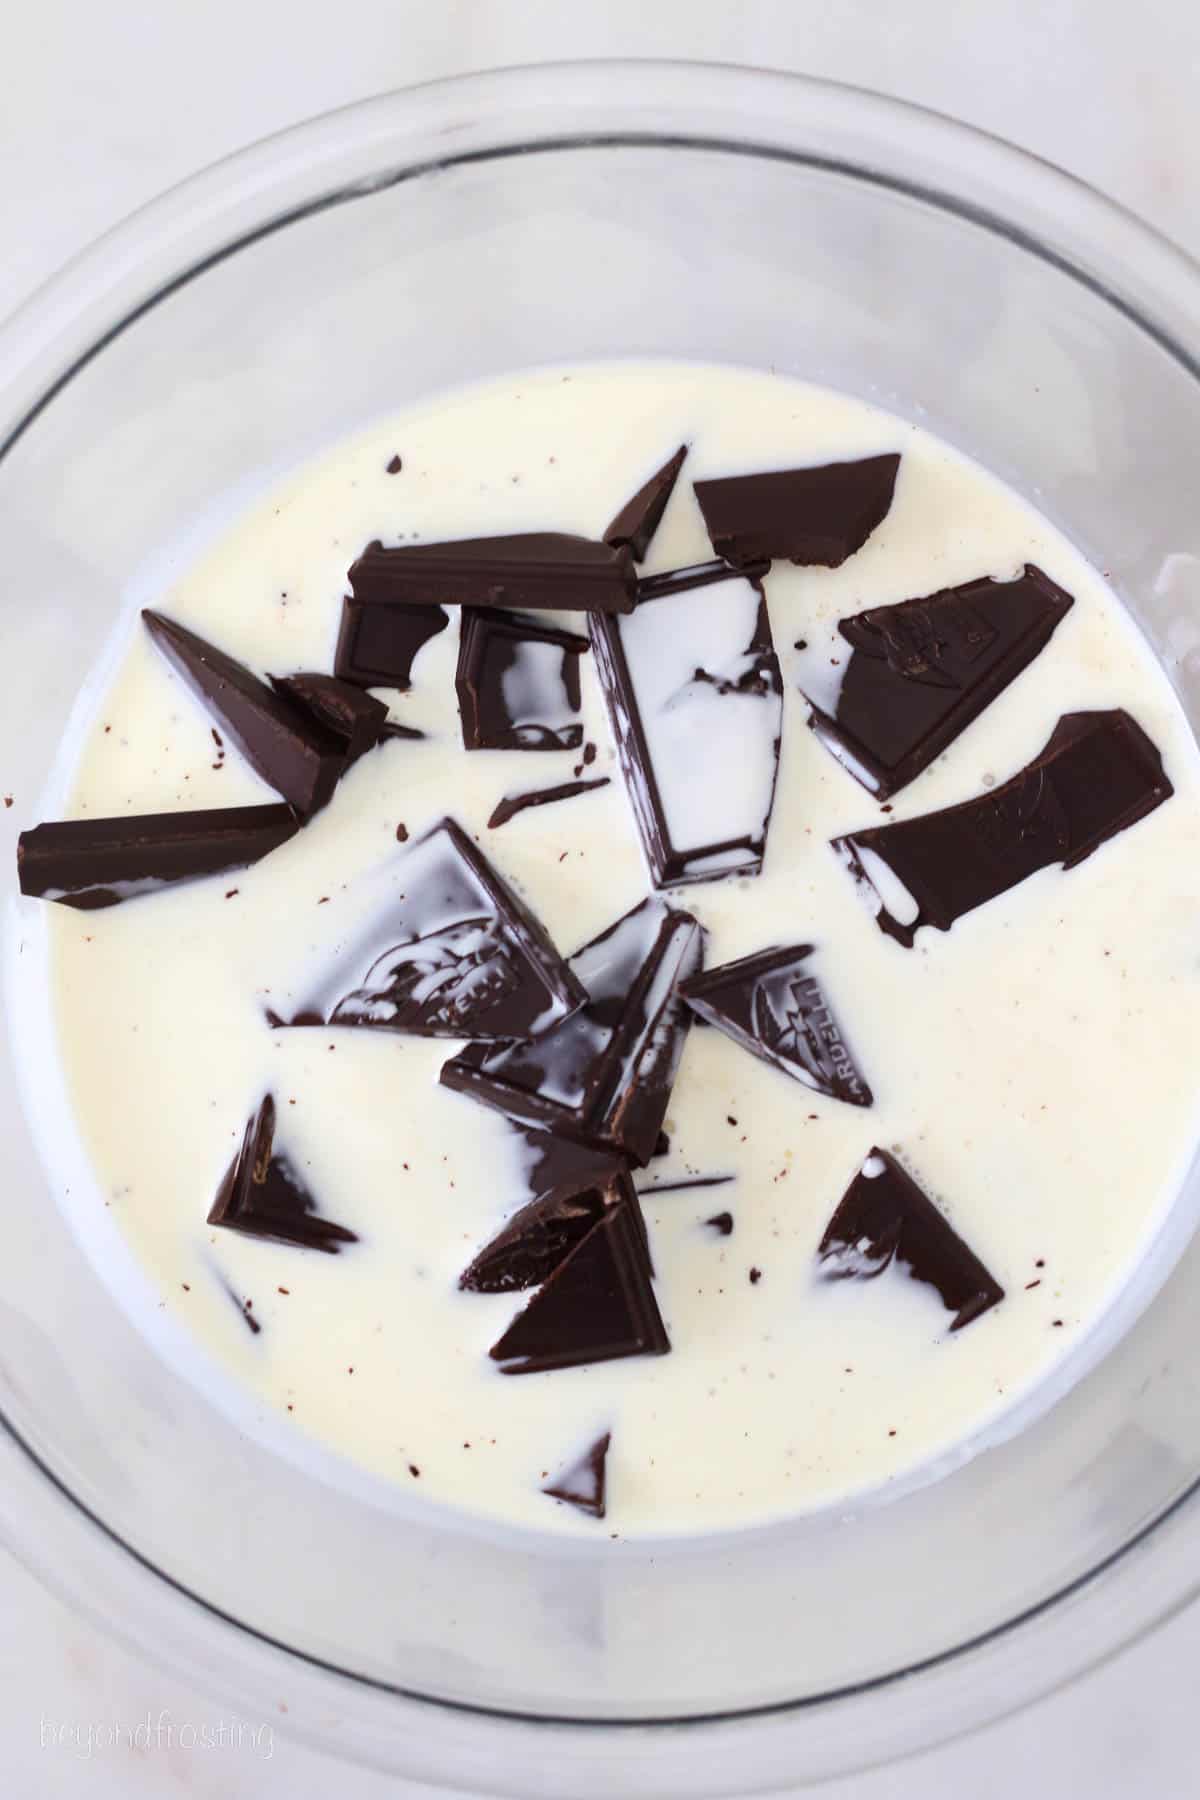 Chopped chocolate added to a bowl with heavy cream.